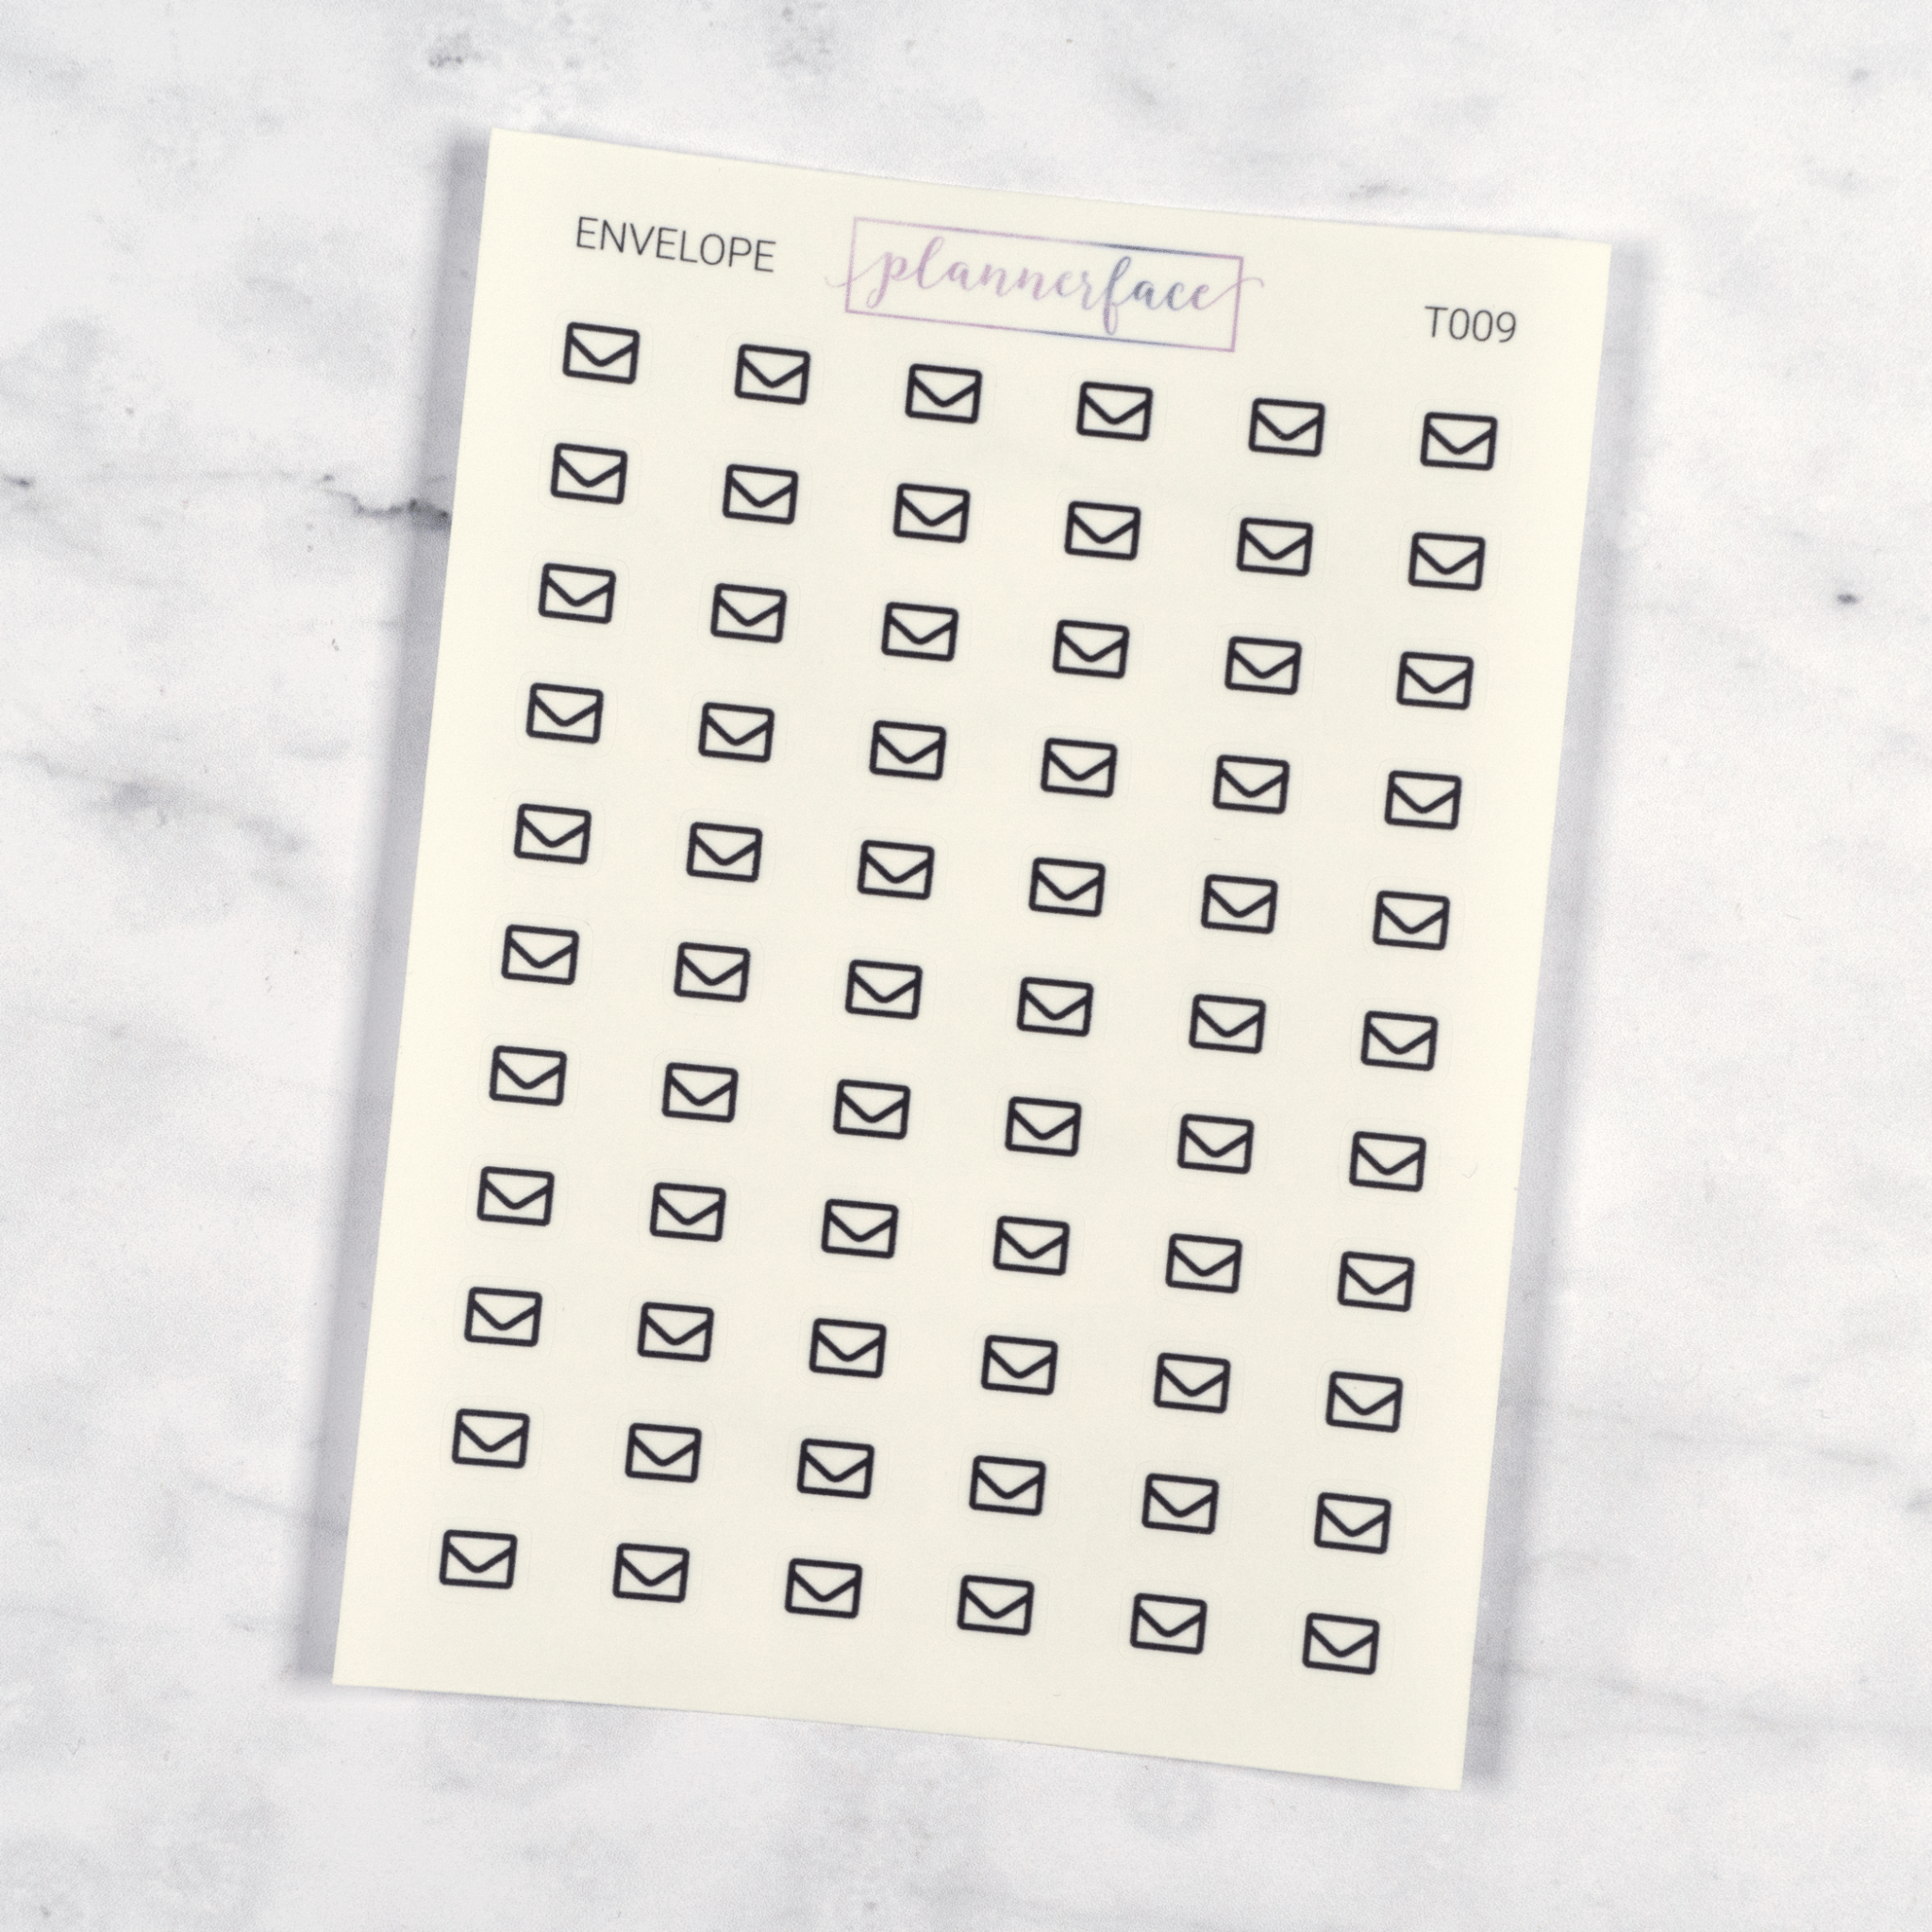 Envelope Transparent Icon Stickers by Plannerface